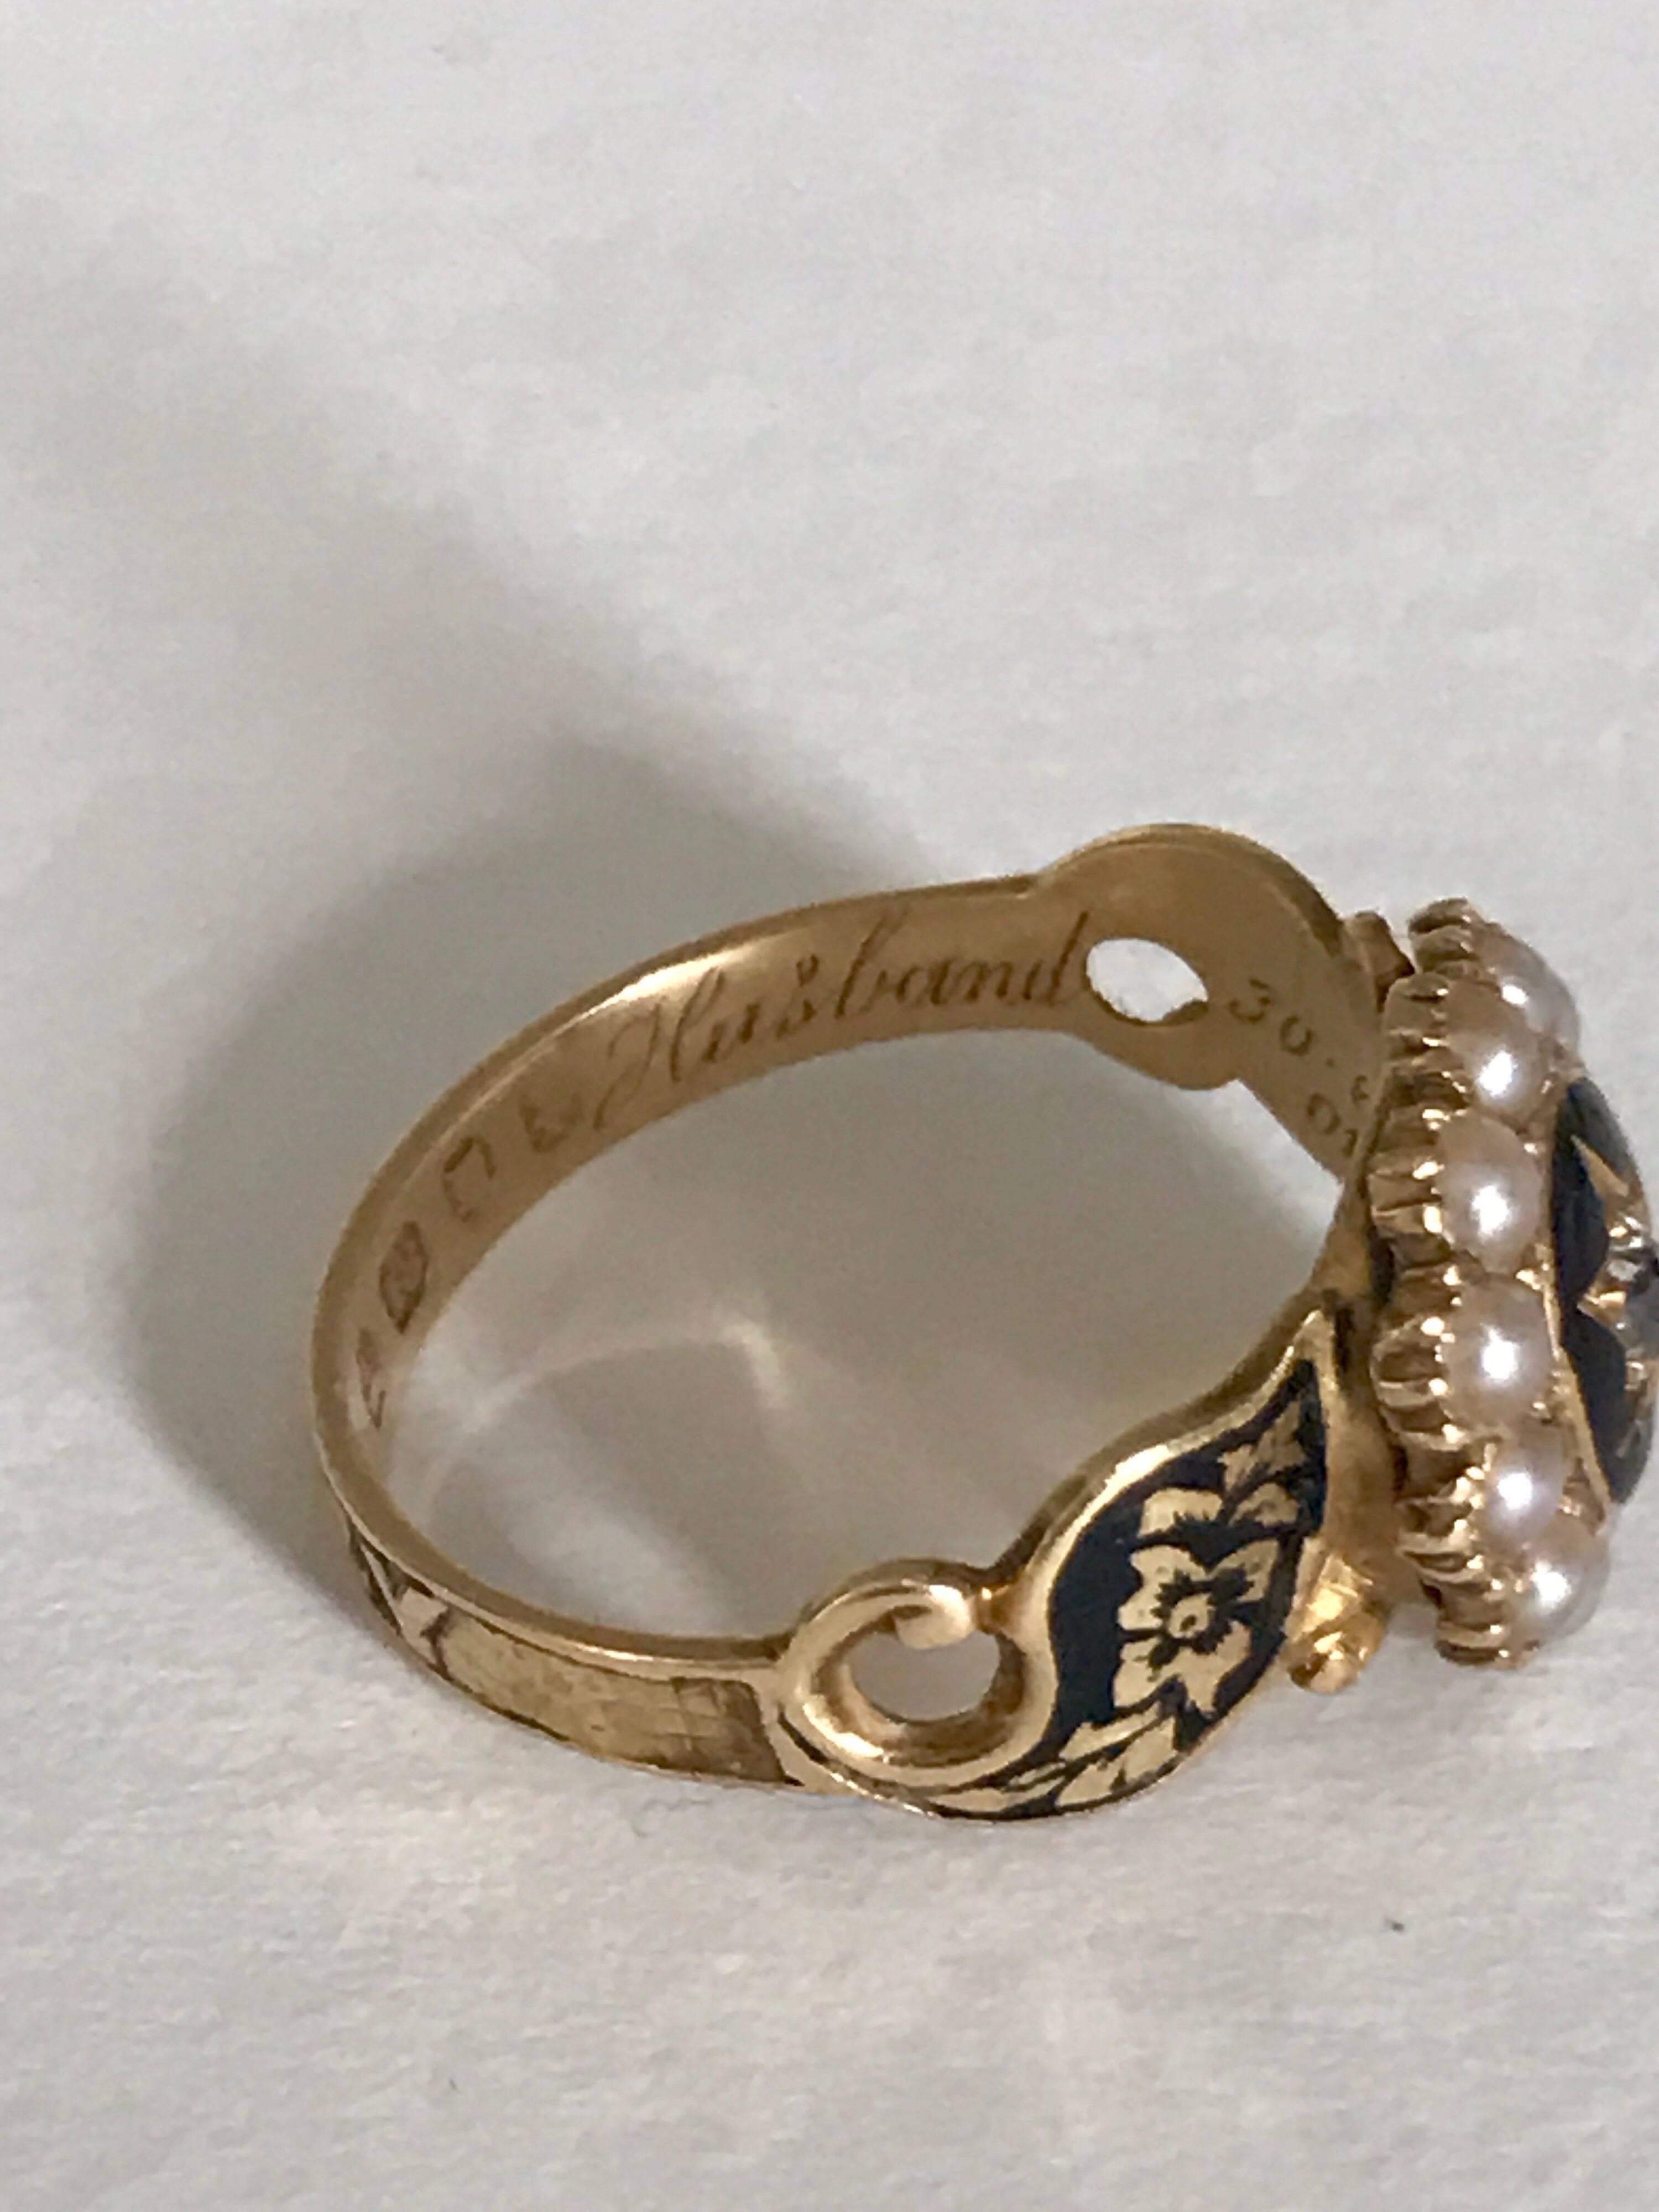 This lovely example of a mourning ring is set with 12 creamy white natural seed pearls, each 2 mm in diameter and one old European cut diamond at the centre 2.5mm. The ring is hand crafted in 18 karat gold and fully hallmarked with English marks